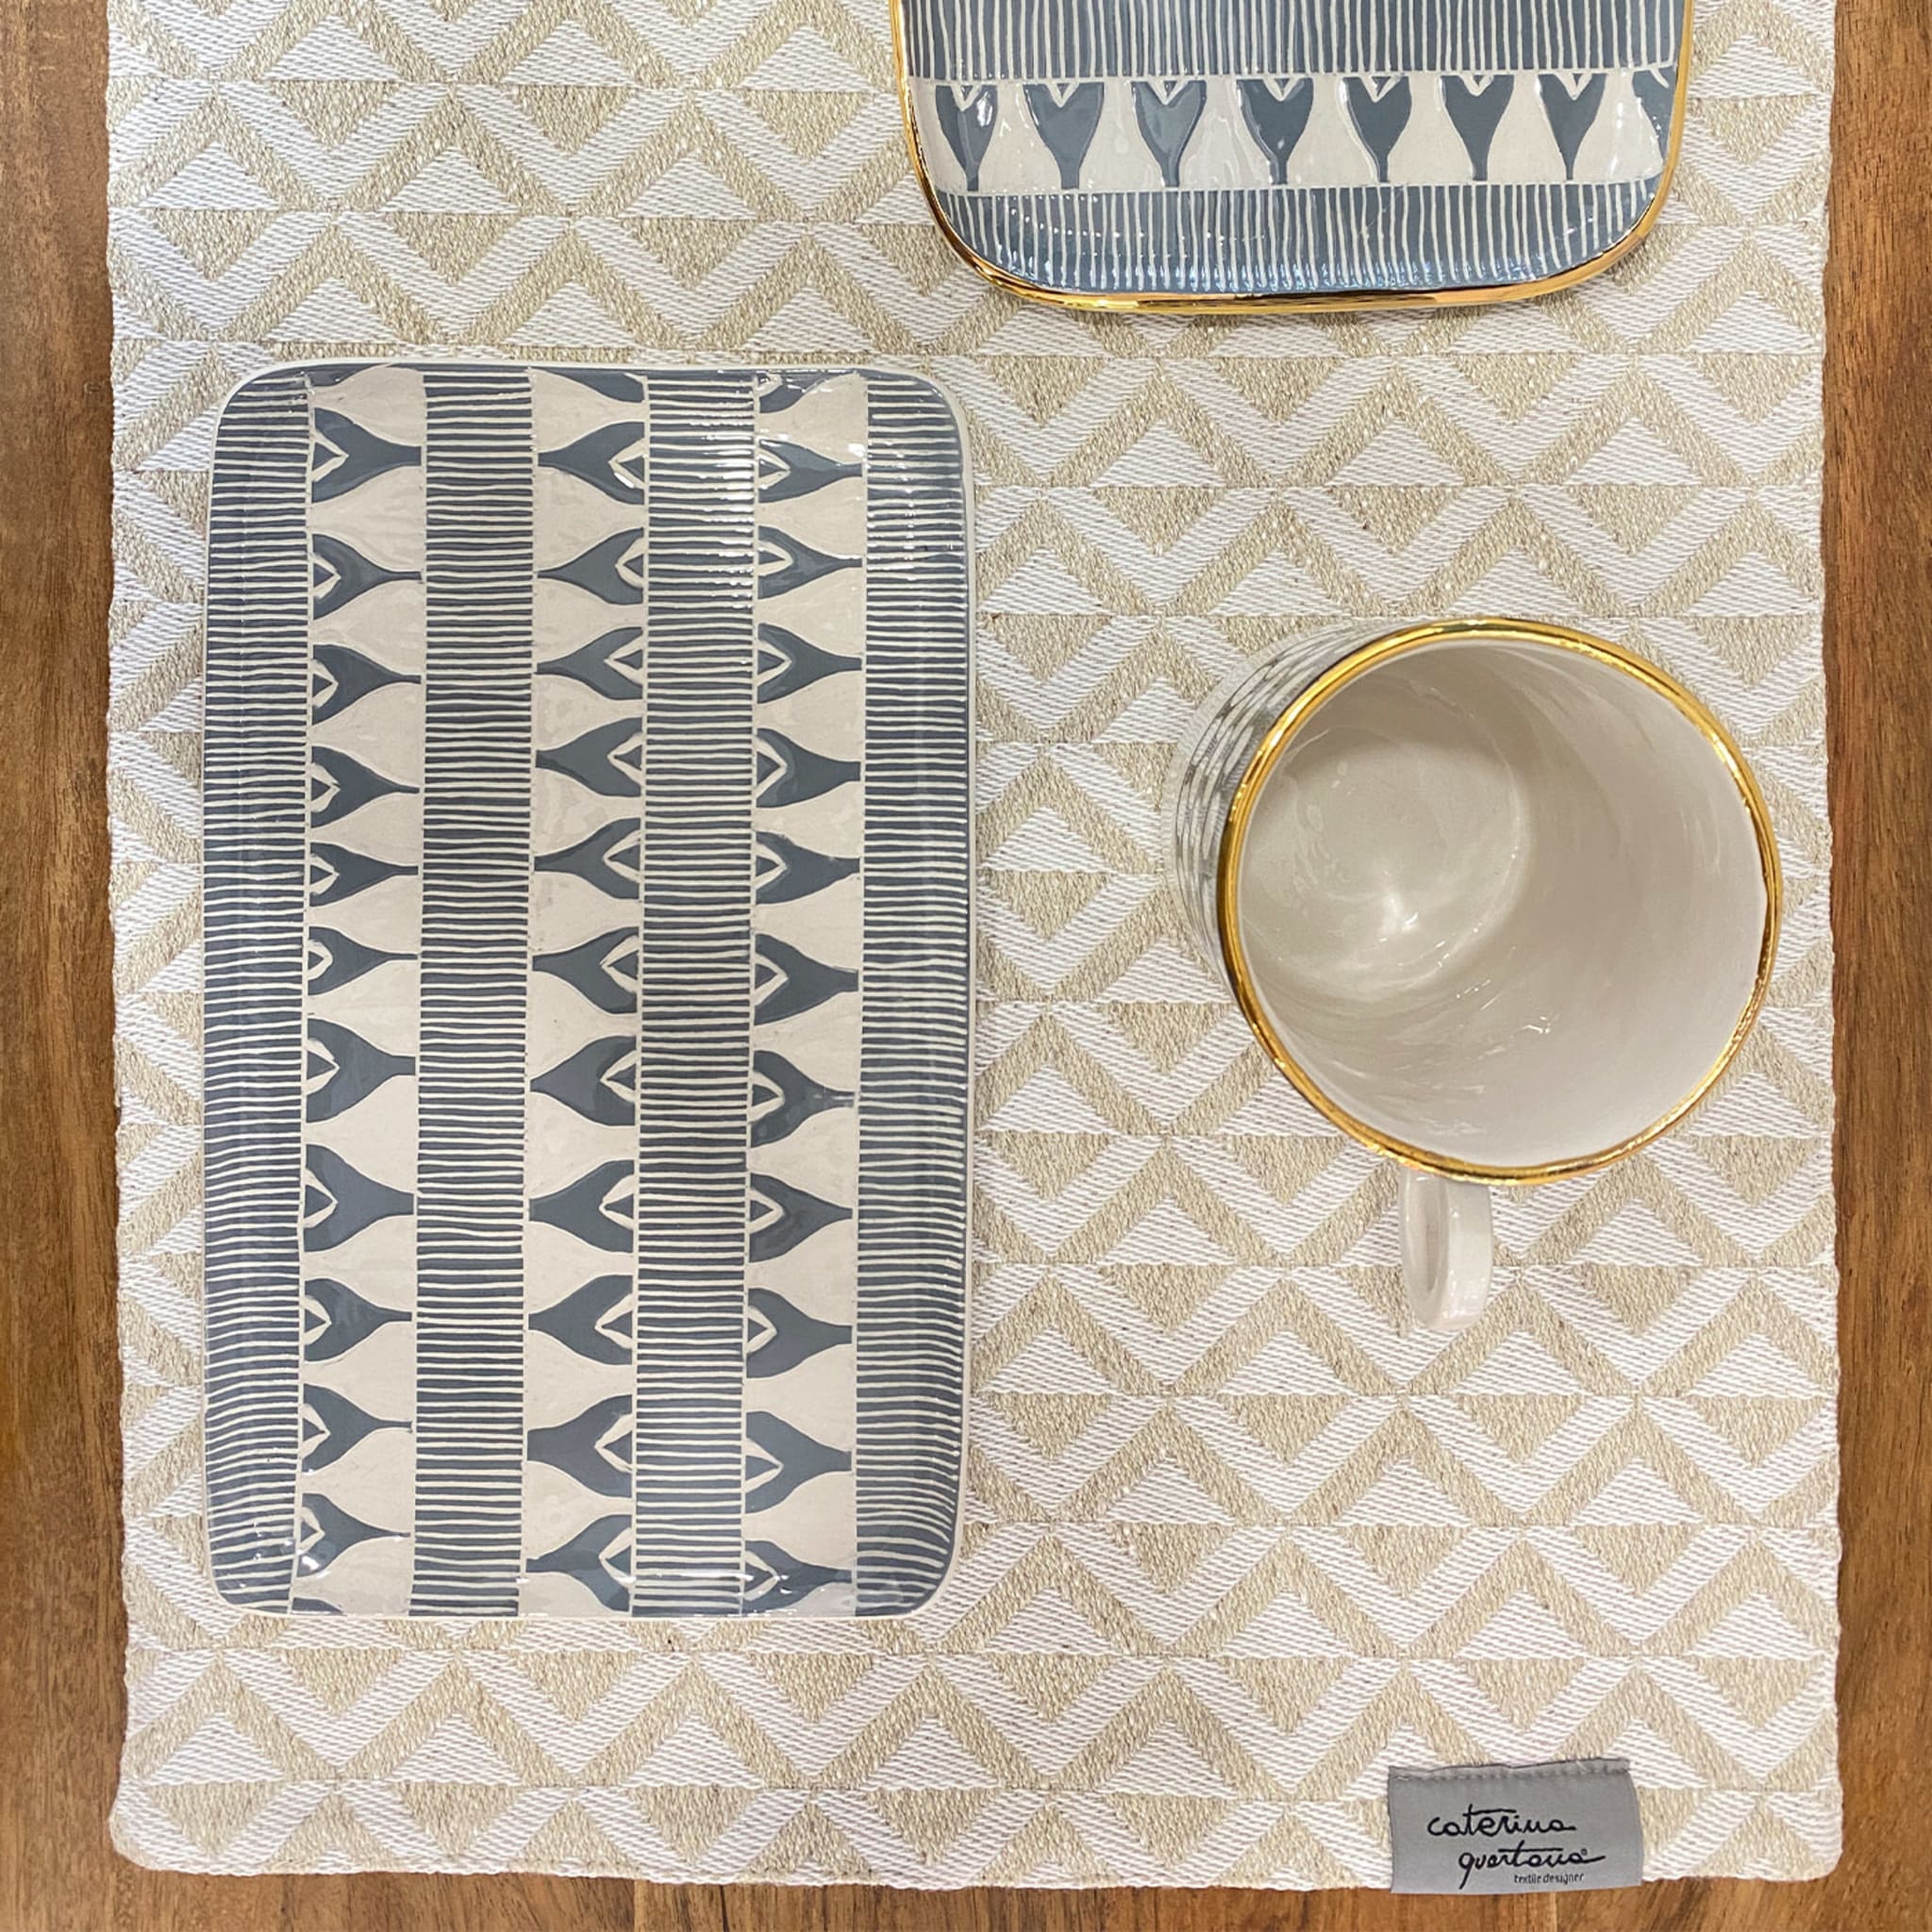 Losanghe Patterned Set of 2 Off-White&Ecru Placemats - Alternative view 1